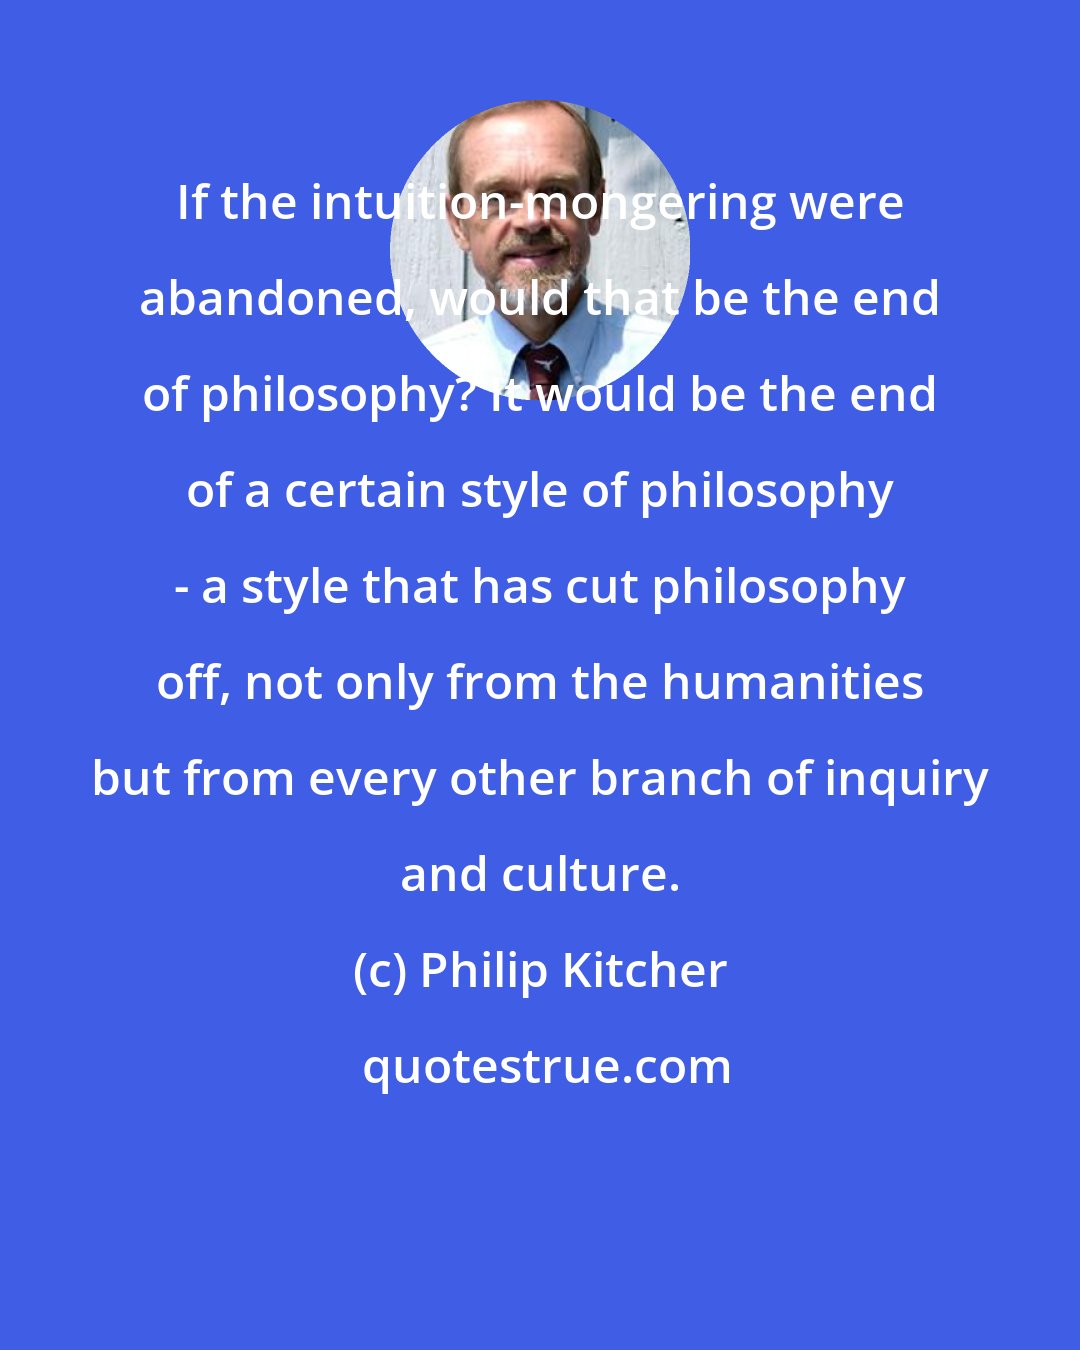 Philip Kitcher: If the intuition-mongering were abandoned, would that be the end of philosophy? It would be the end of a certain style of philosophy - a style that has cut philosophy off, not only from the humanities but from every other branch of inquiry and culture.